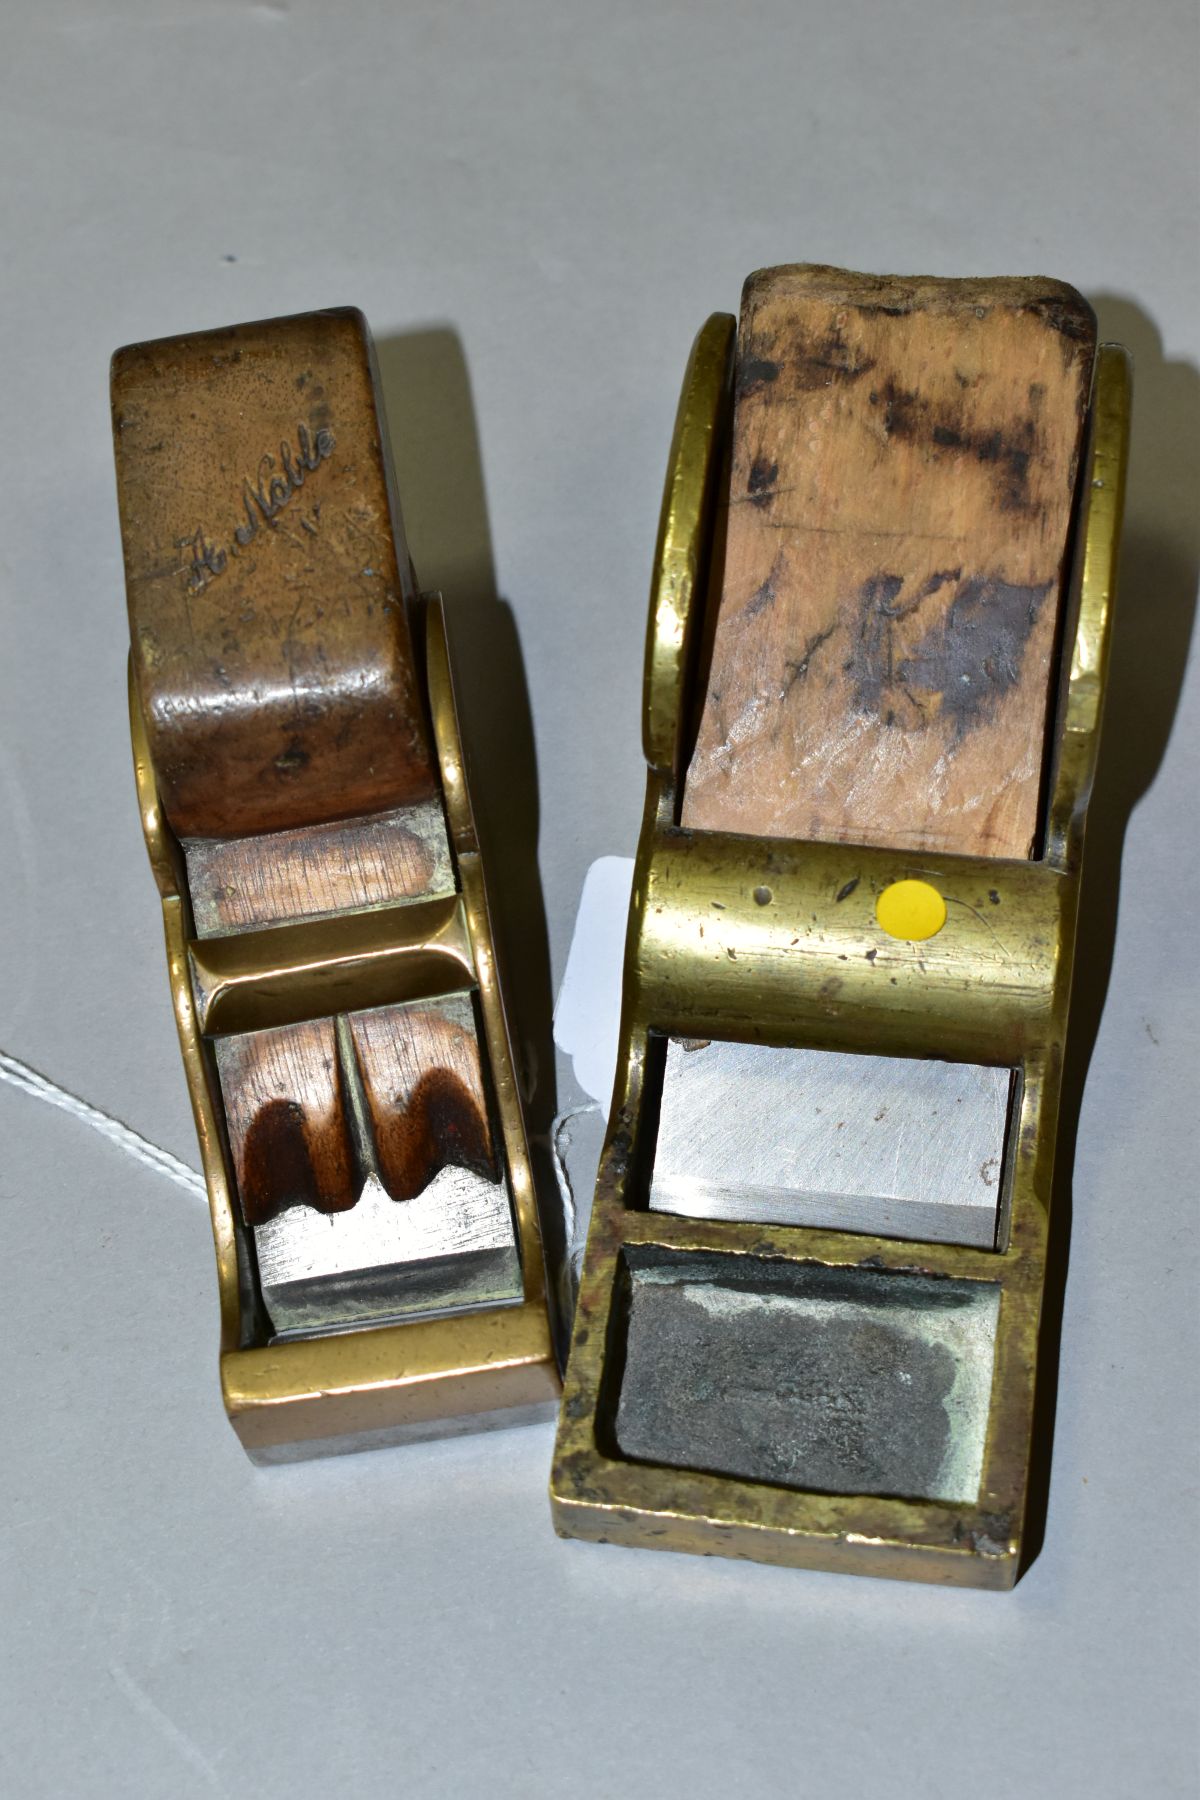 TWO VINTAGE BRASS CHARIOT PLANES comprising of a bronze plane 5'' long with a steel sole plate, - Image 3 of 6